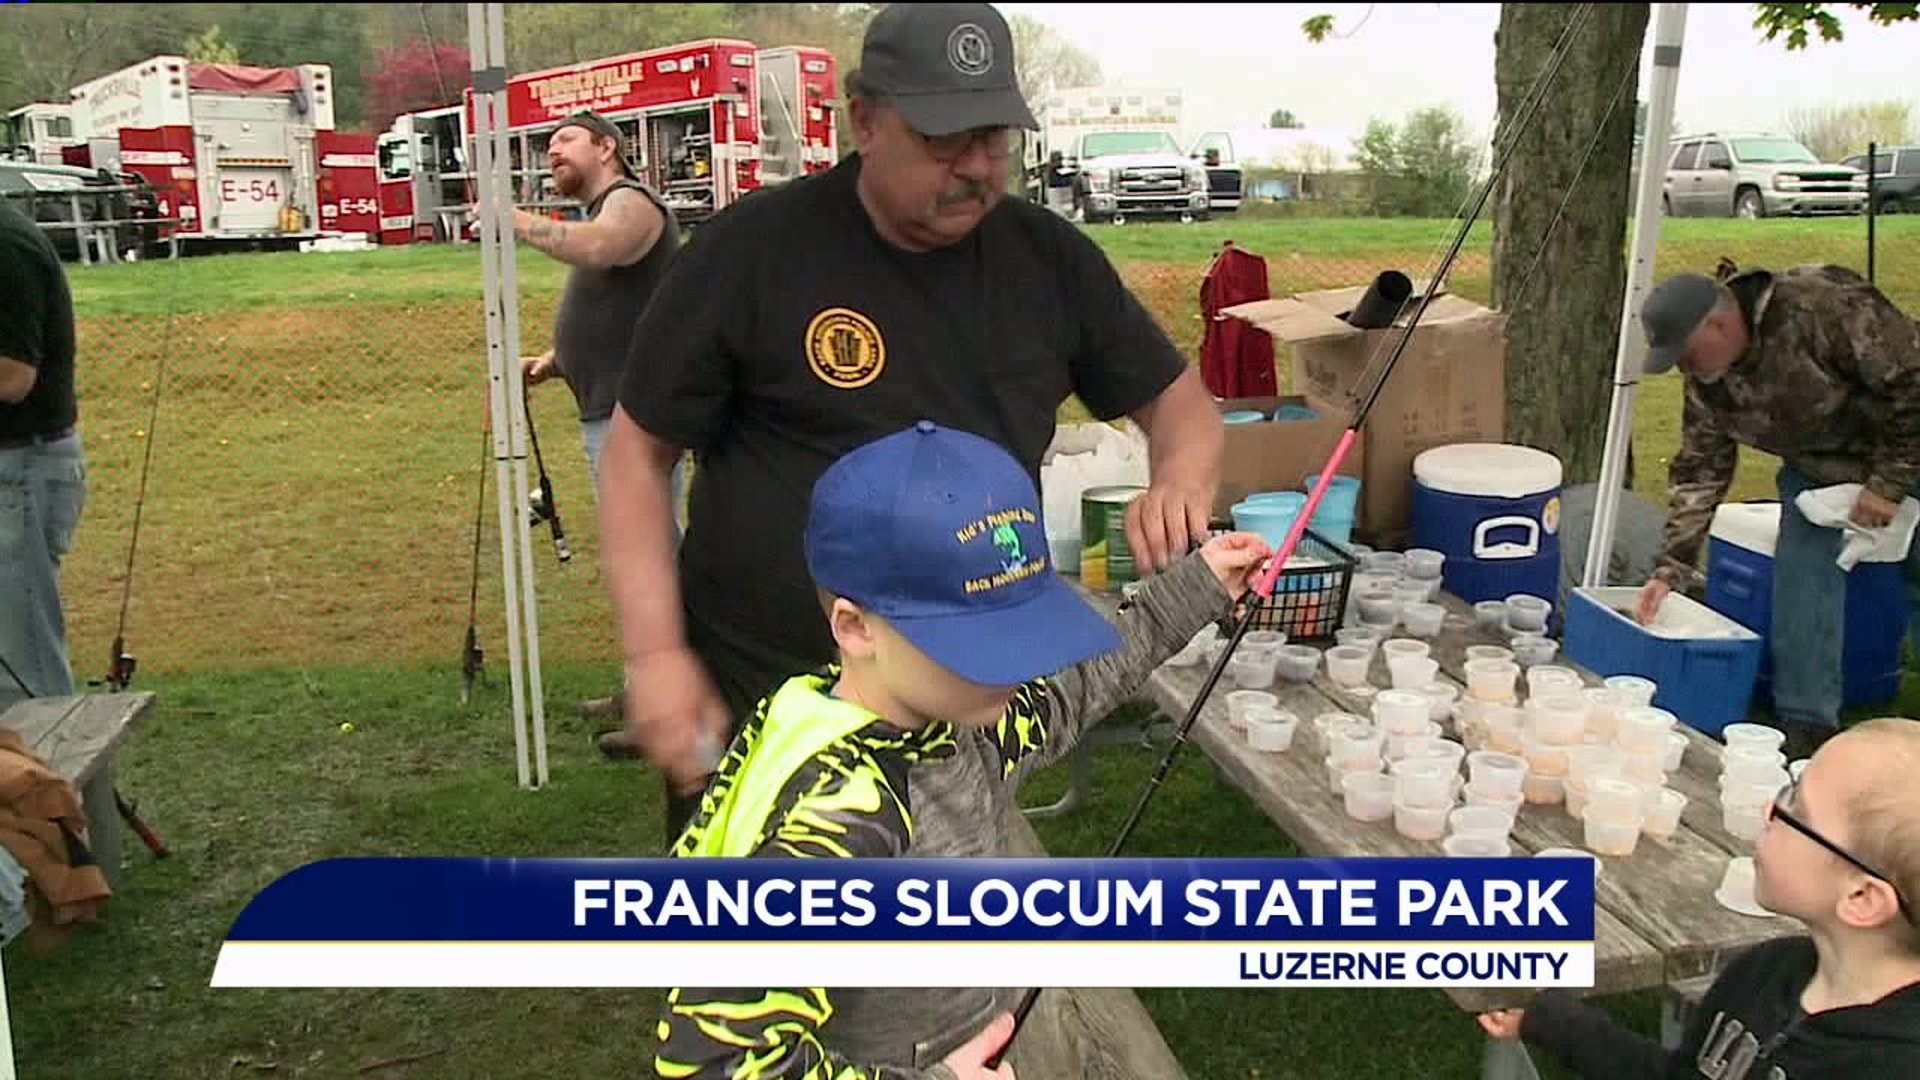 Police Officers and Firefighters in Luzerne County Spend the Day Fishing with Kids